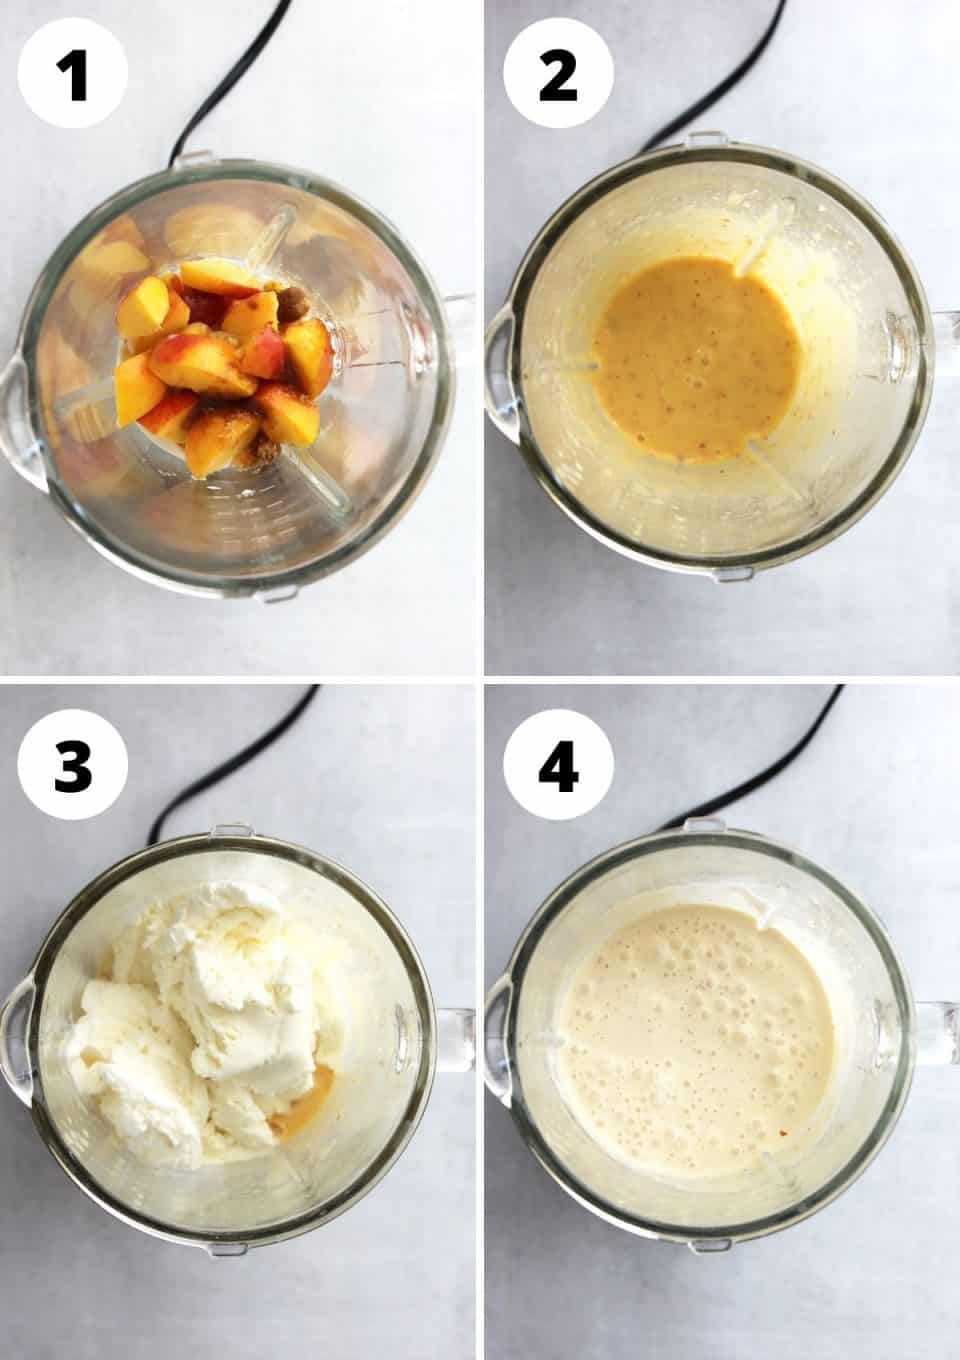 Four step by step photos showing how to make the milkshake in a blender.